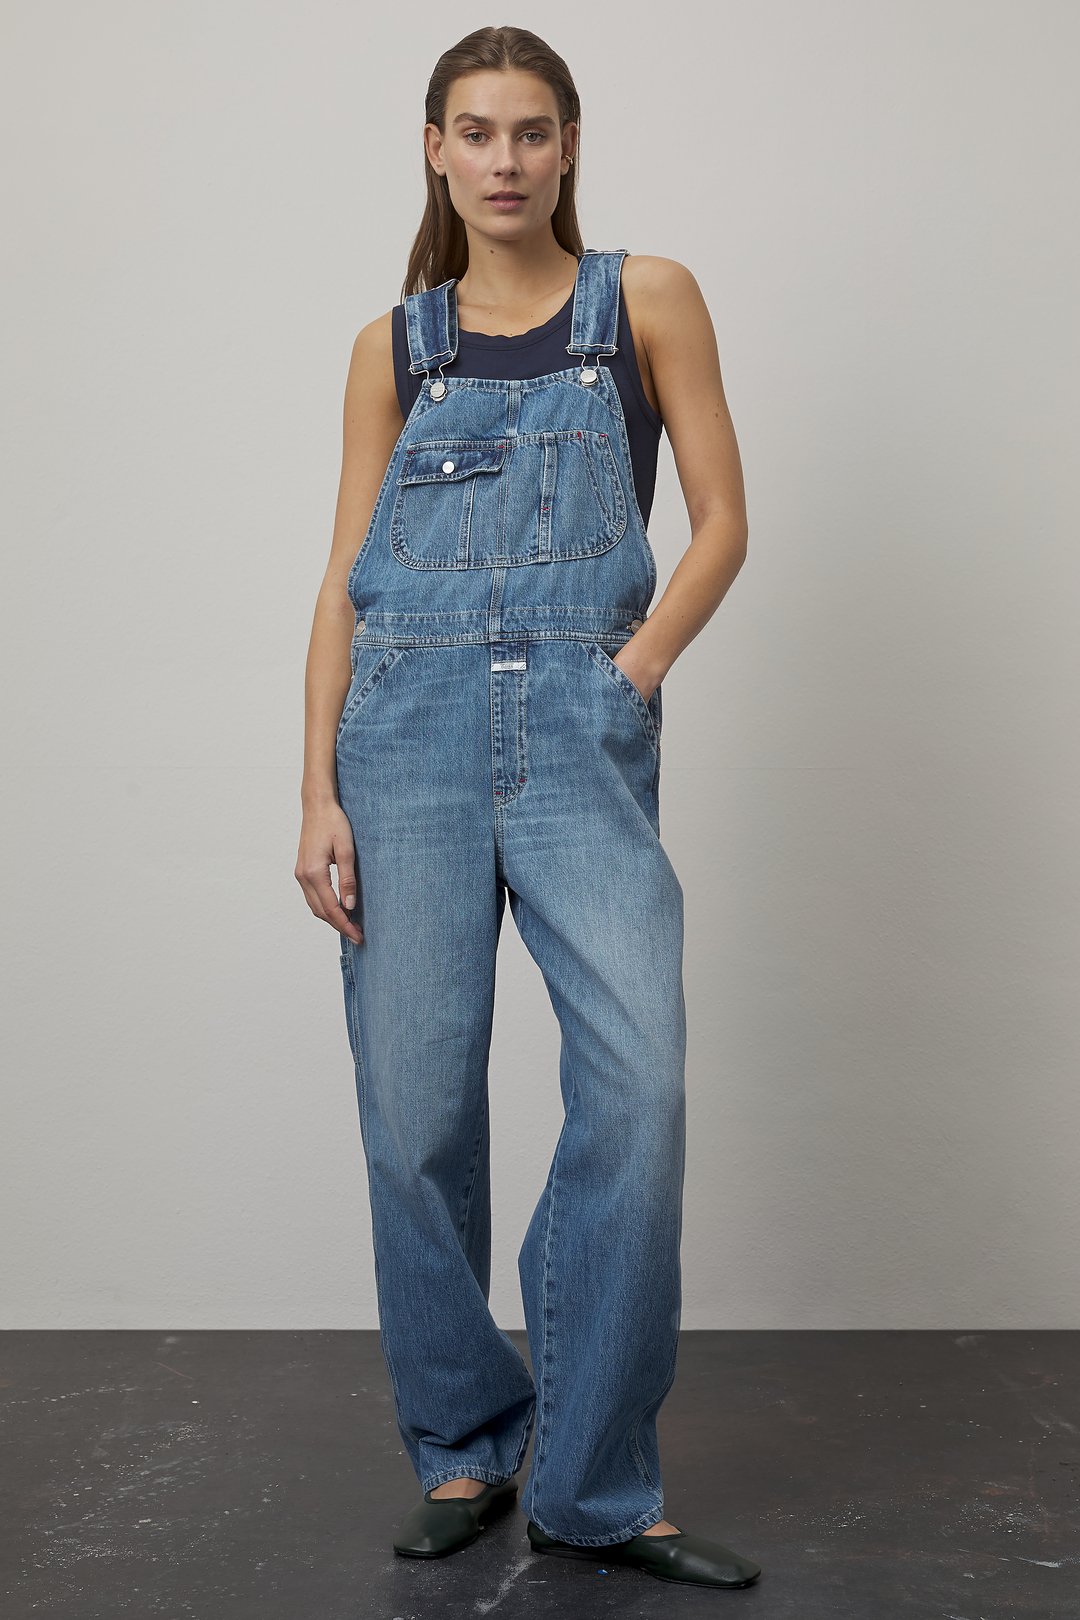 A BETTER BLUE DUNGAREE | CLOSED